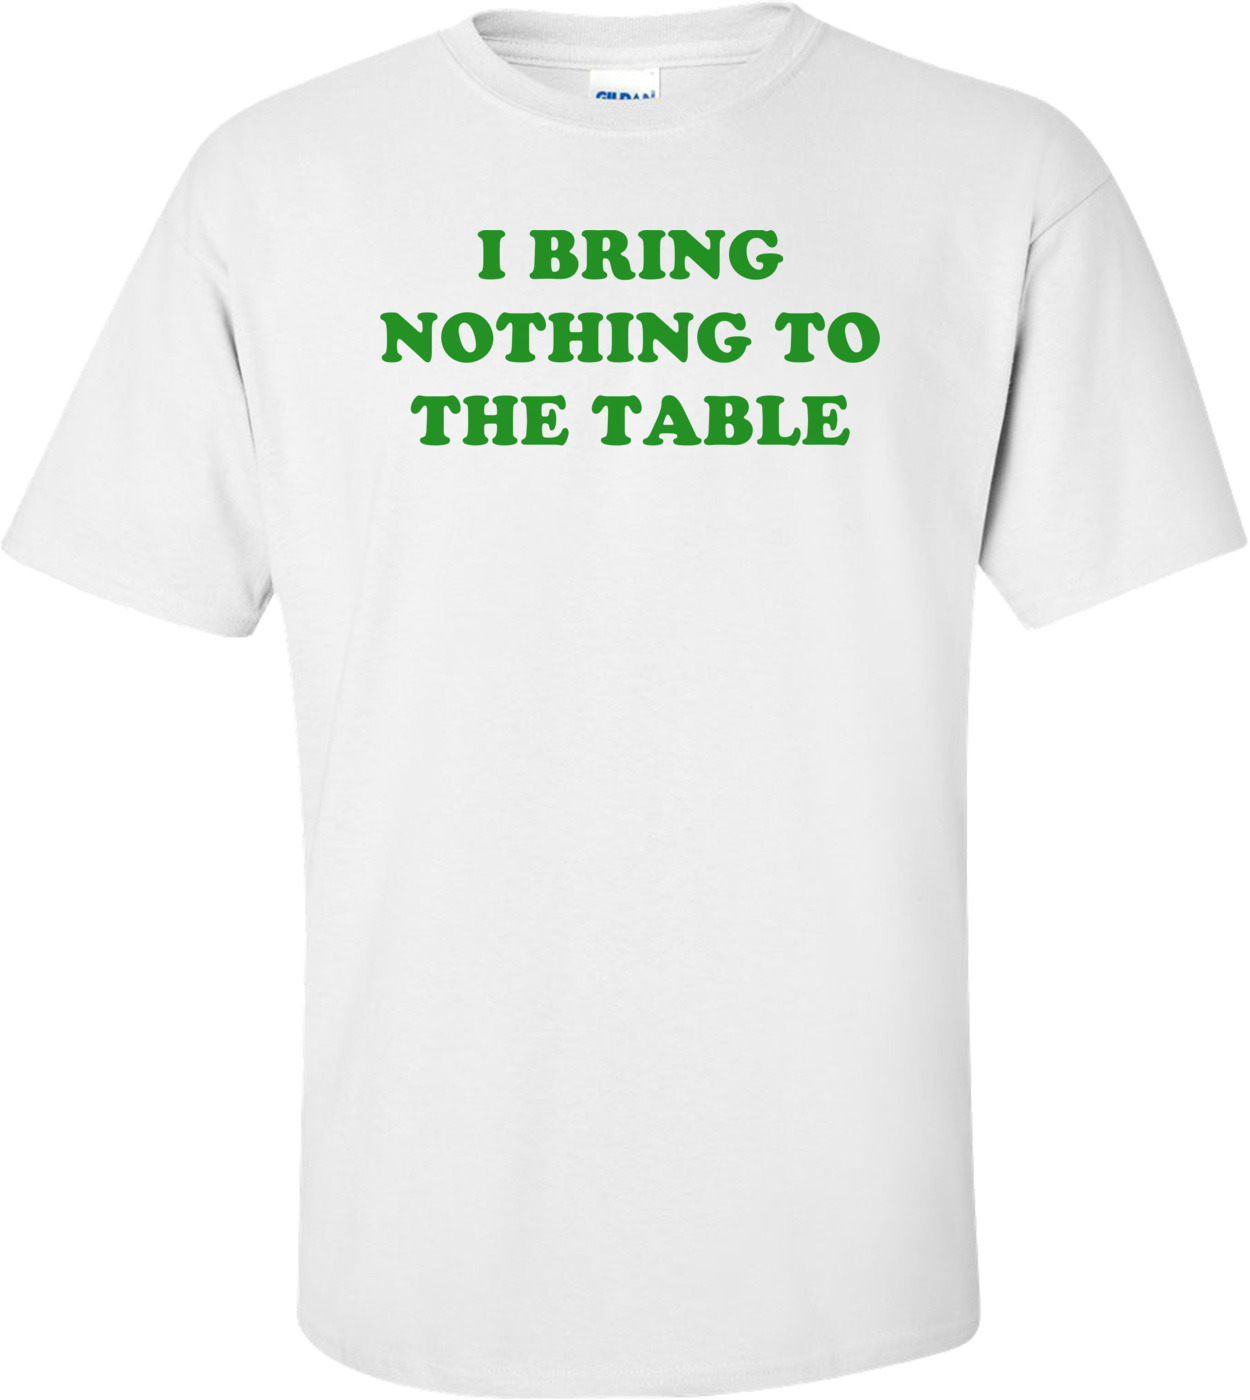 I BRING NOTHING TO THE TABLE shirt